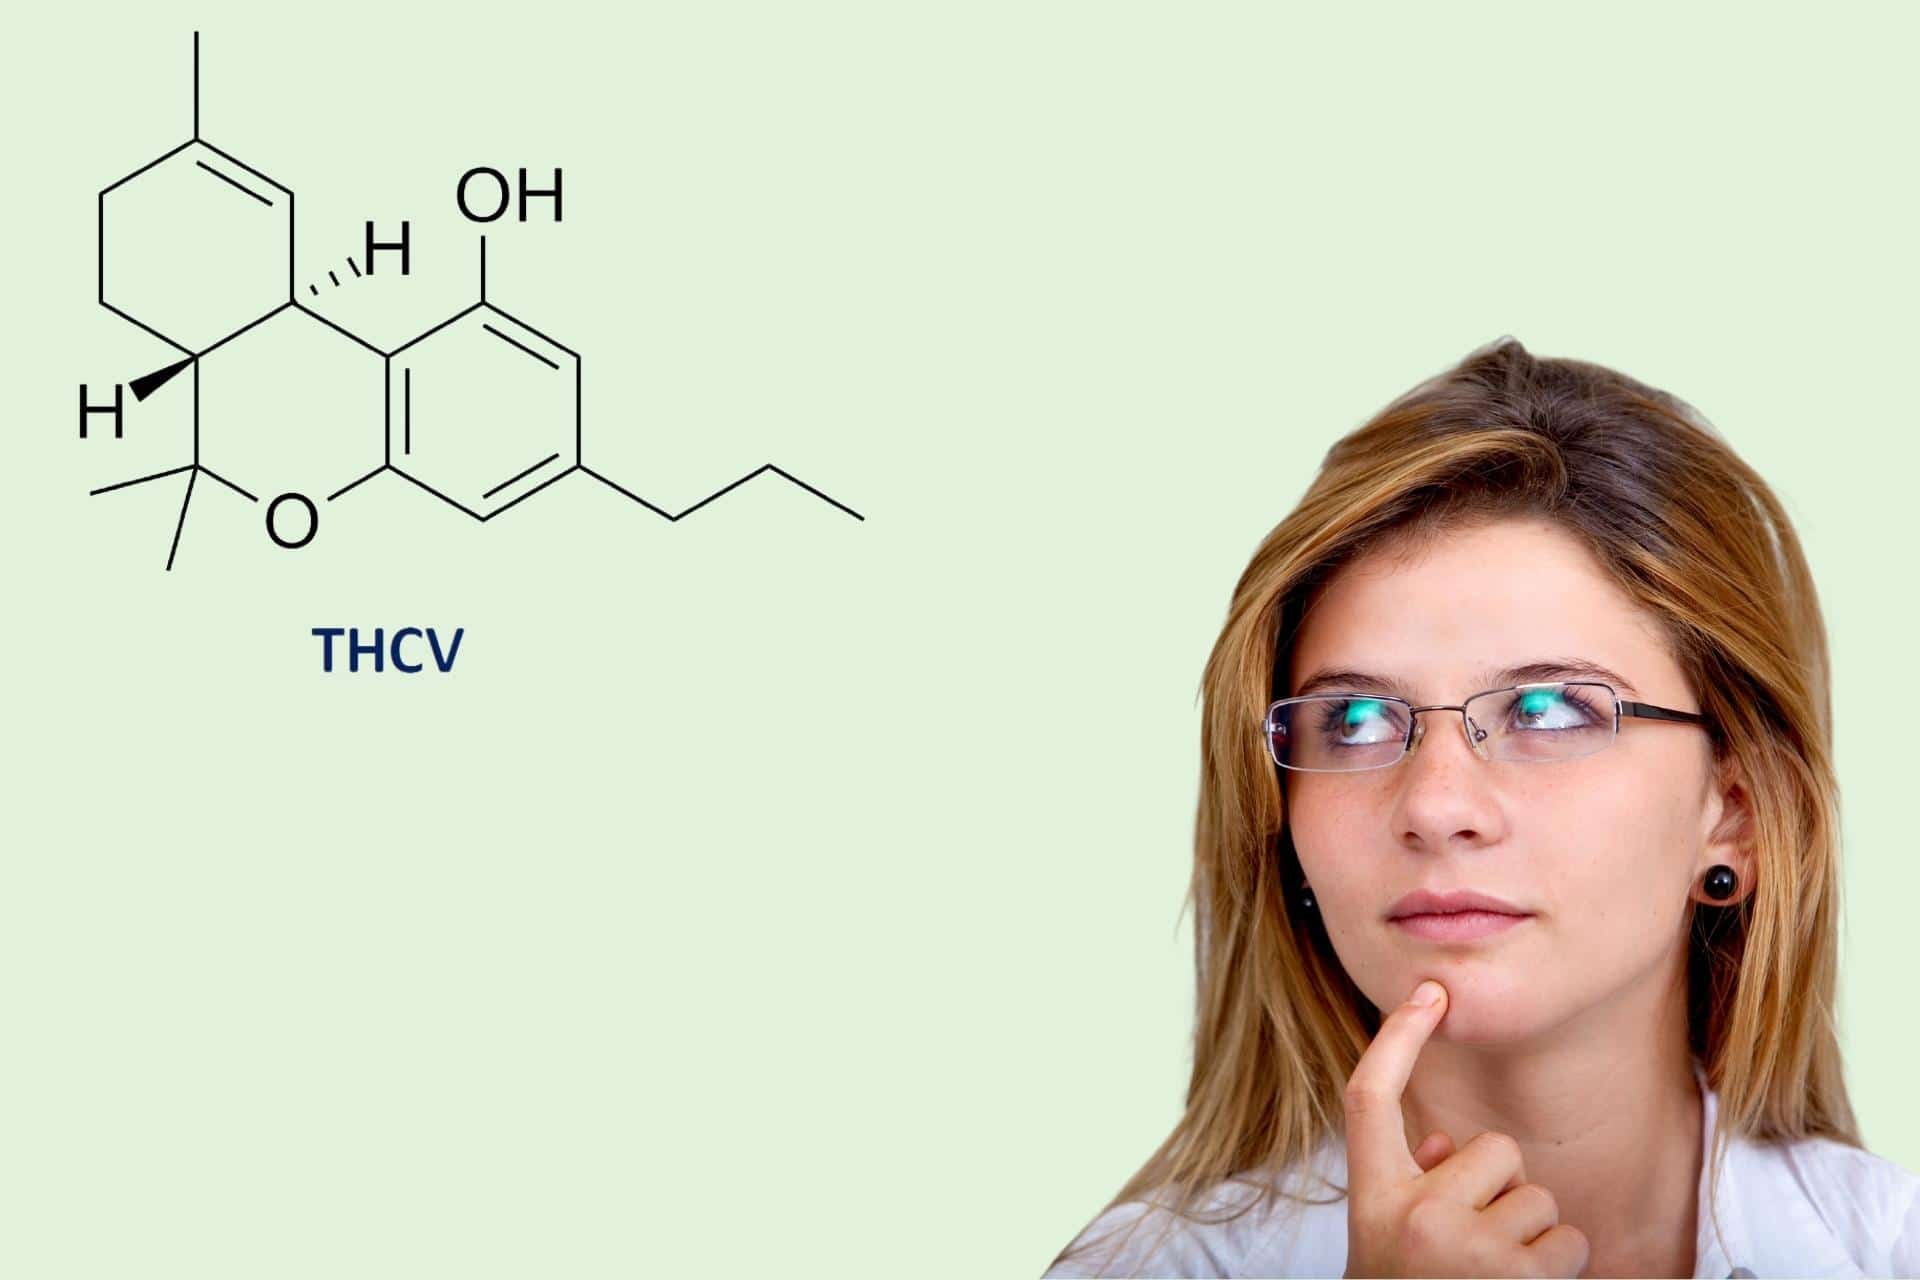 Person in glasses with wondering expression looking at THCV molecular diagram